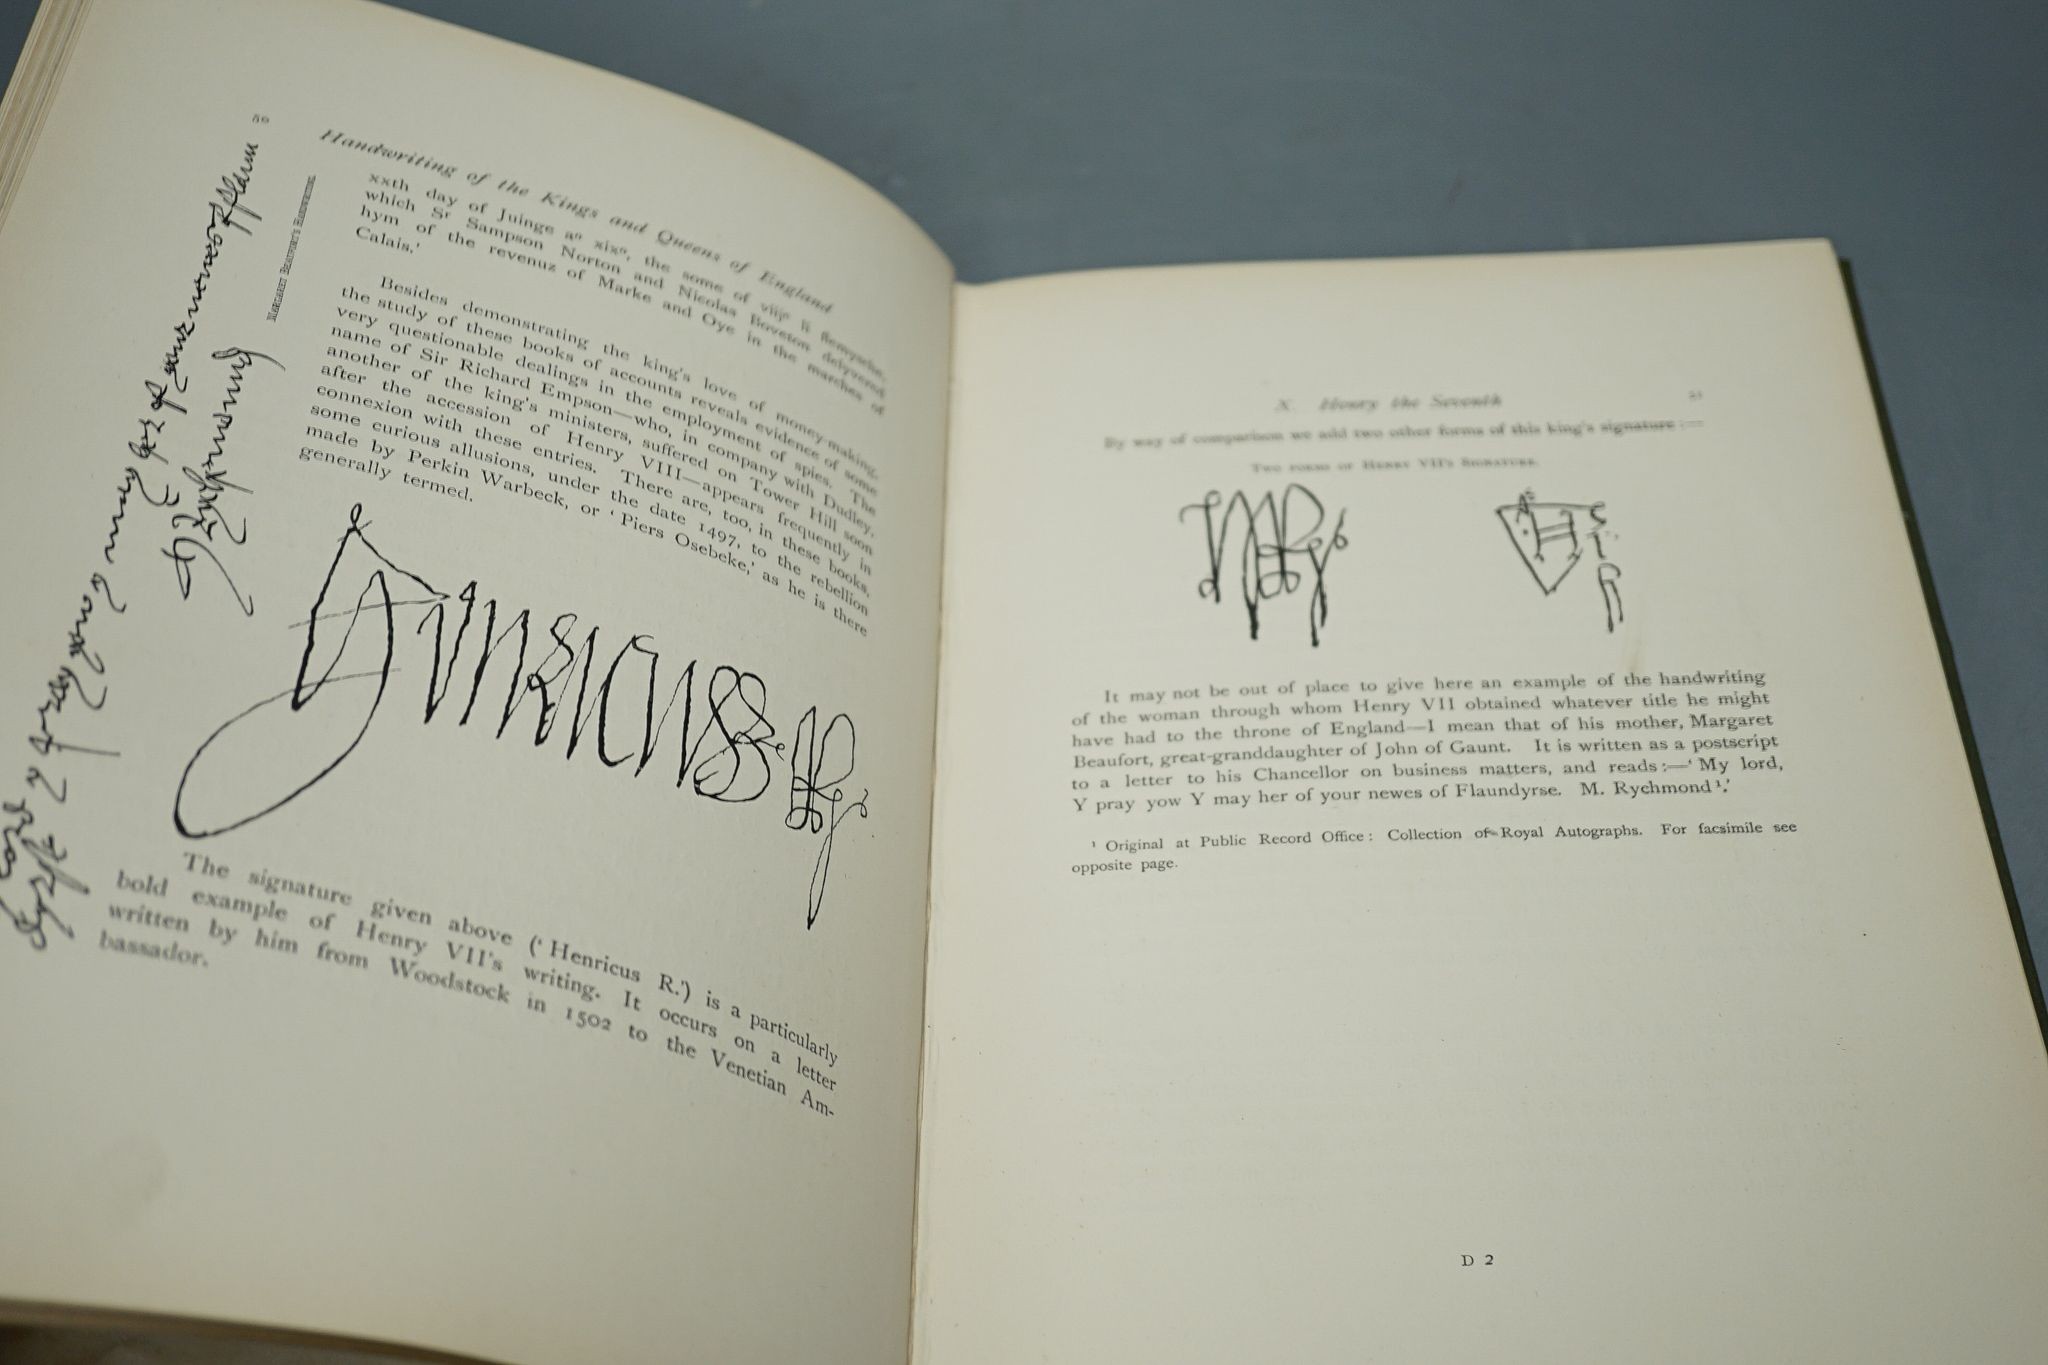 Hardy, W.J. - Handwriting of Kings and Queens, London 1893